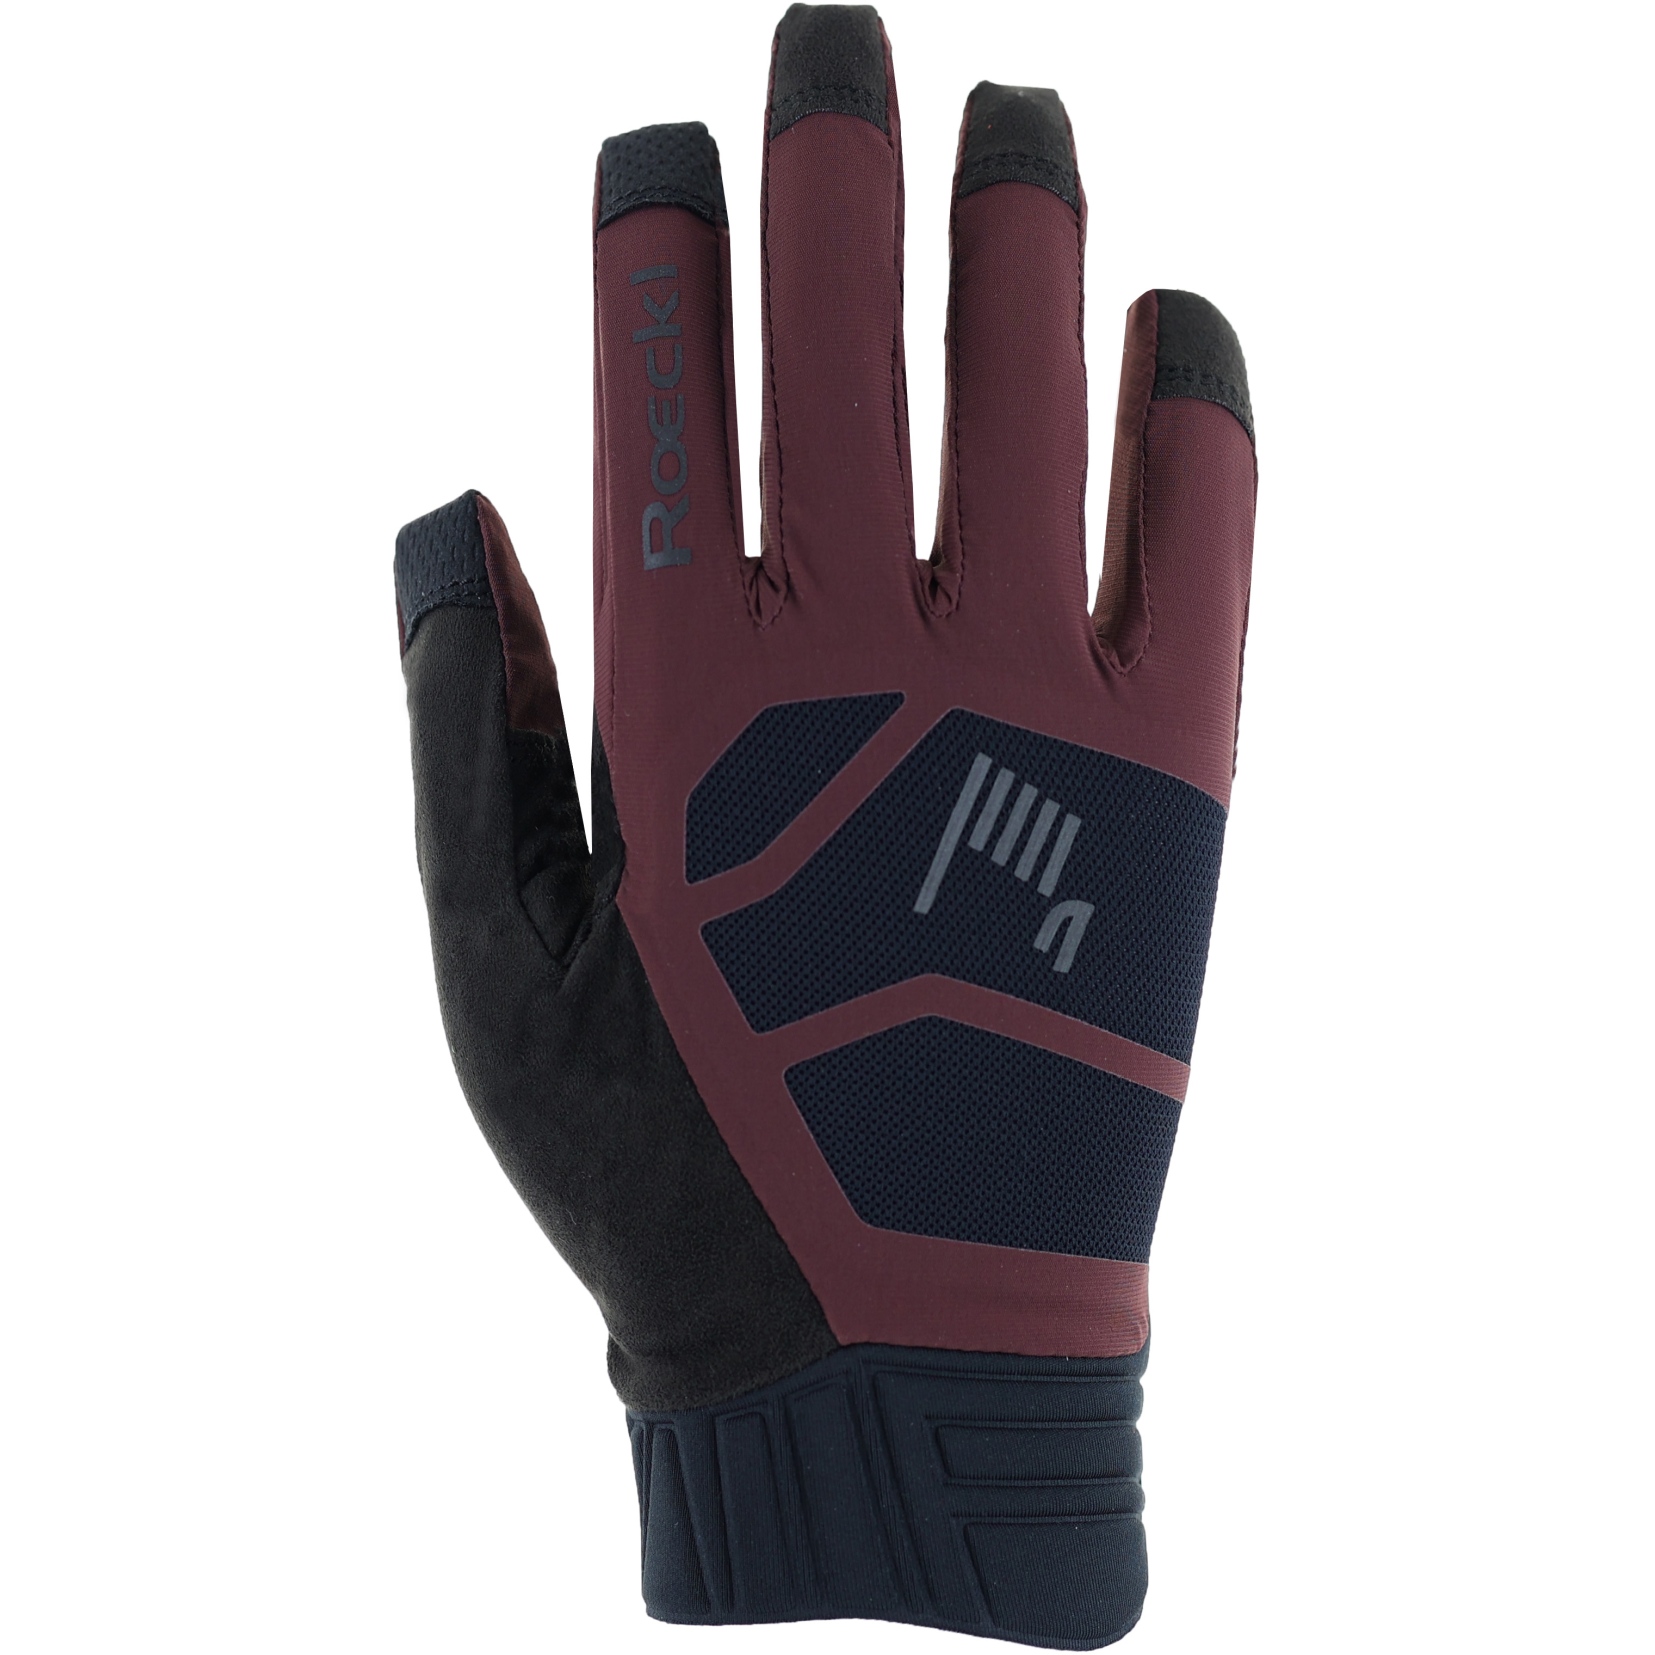 Picture of Roeckl Sports Murnau Cycling Gloves - mahogany 7700